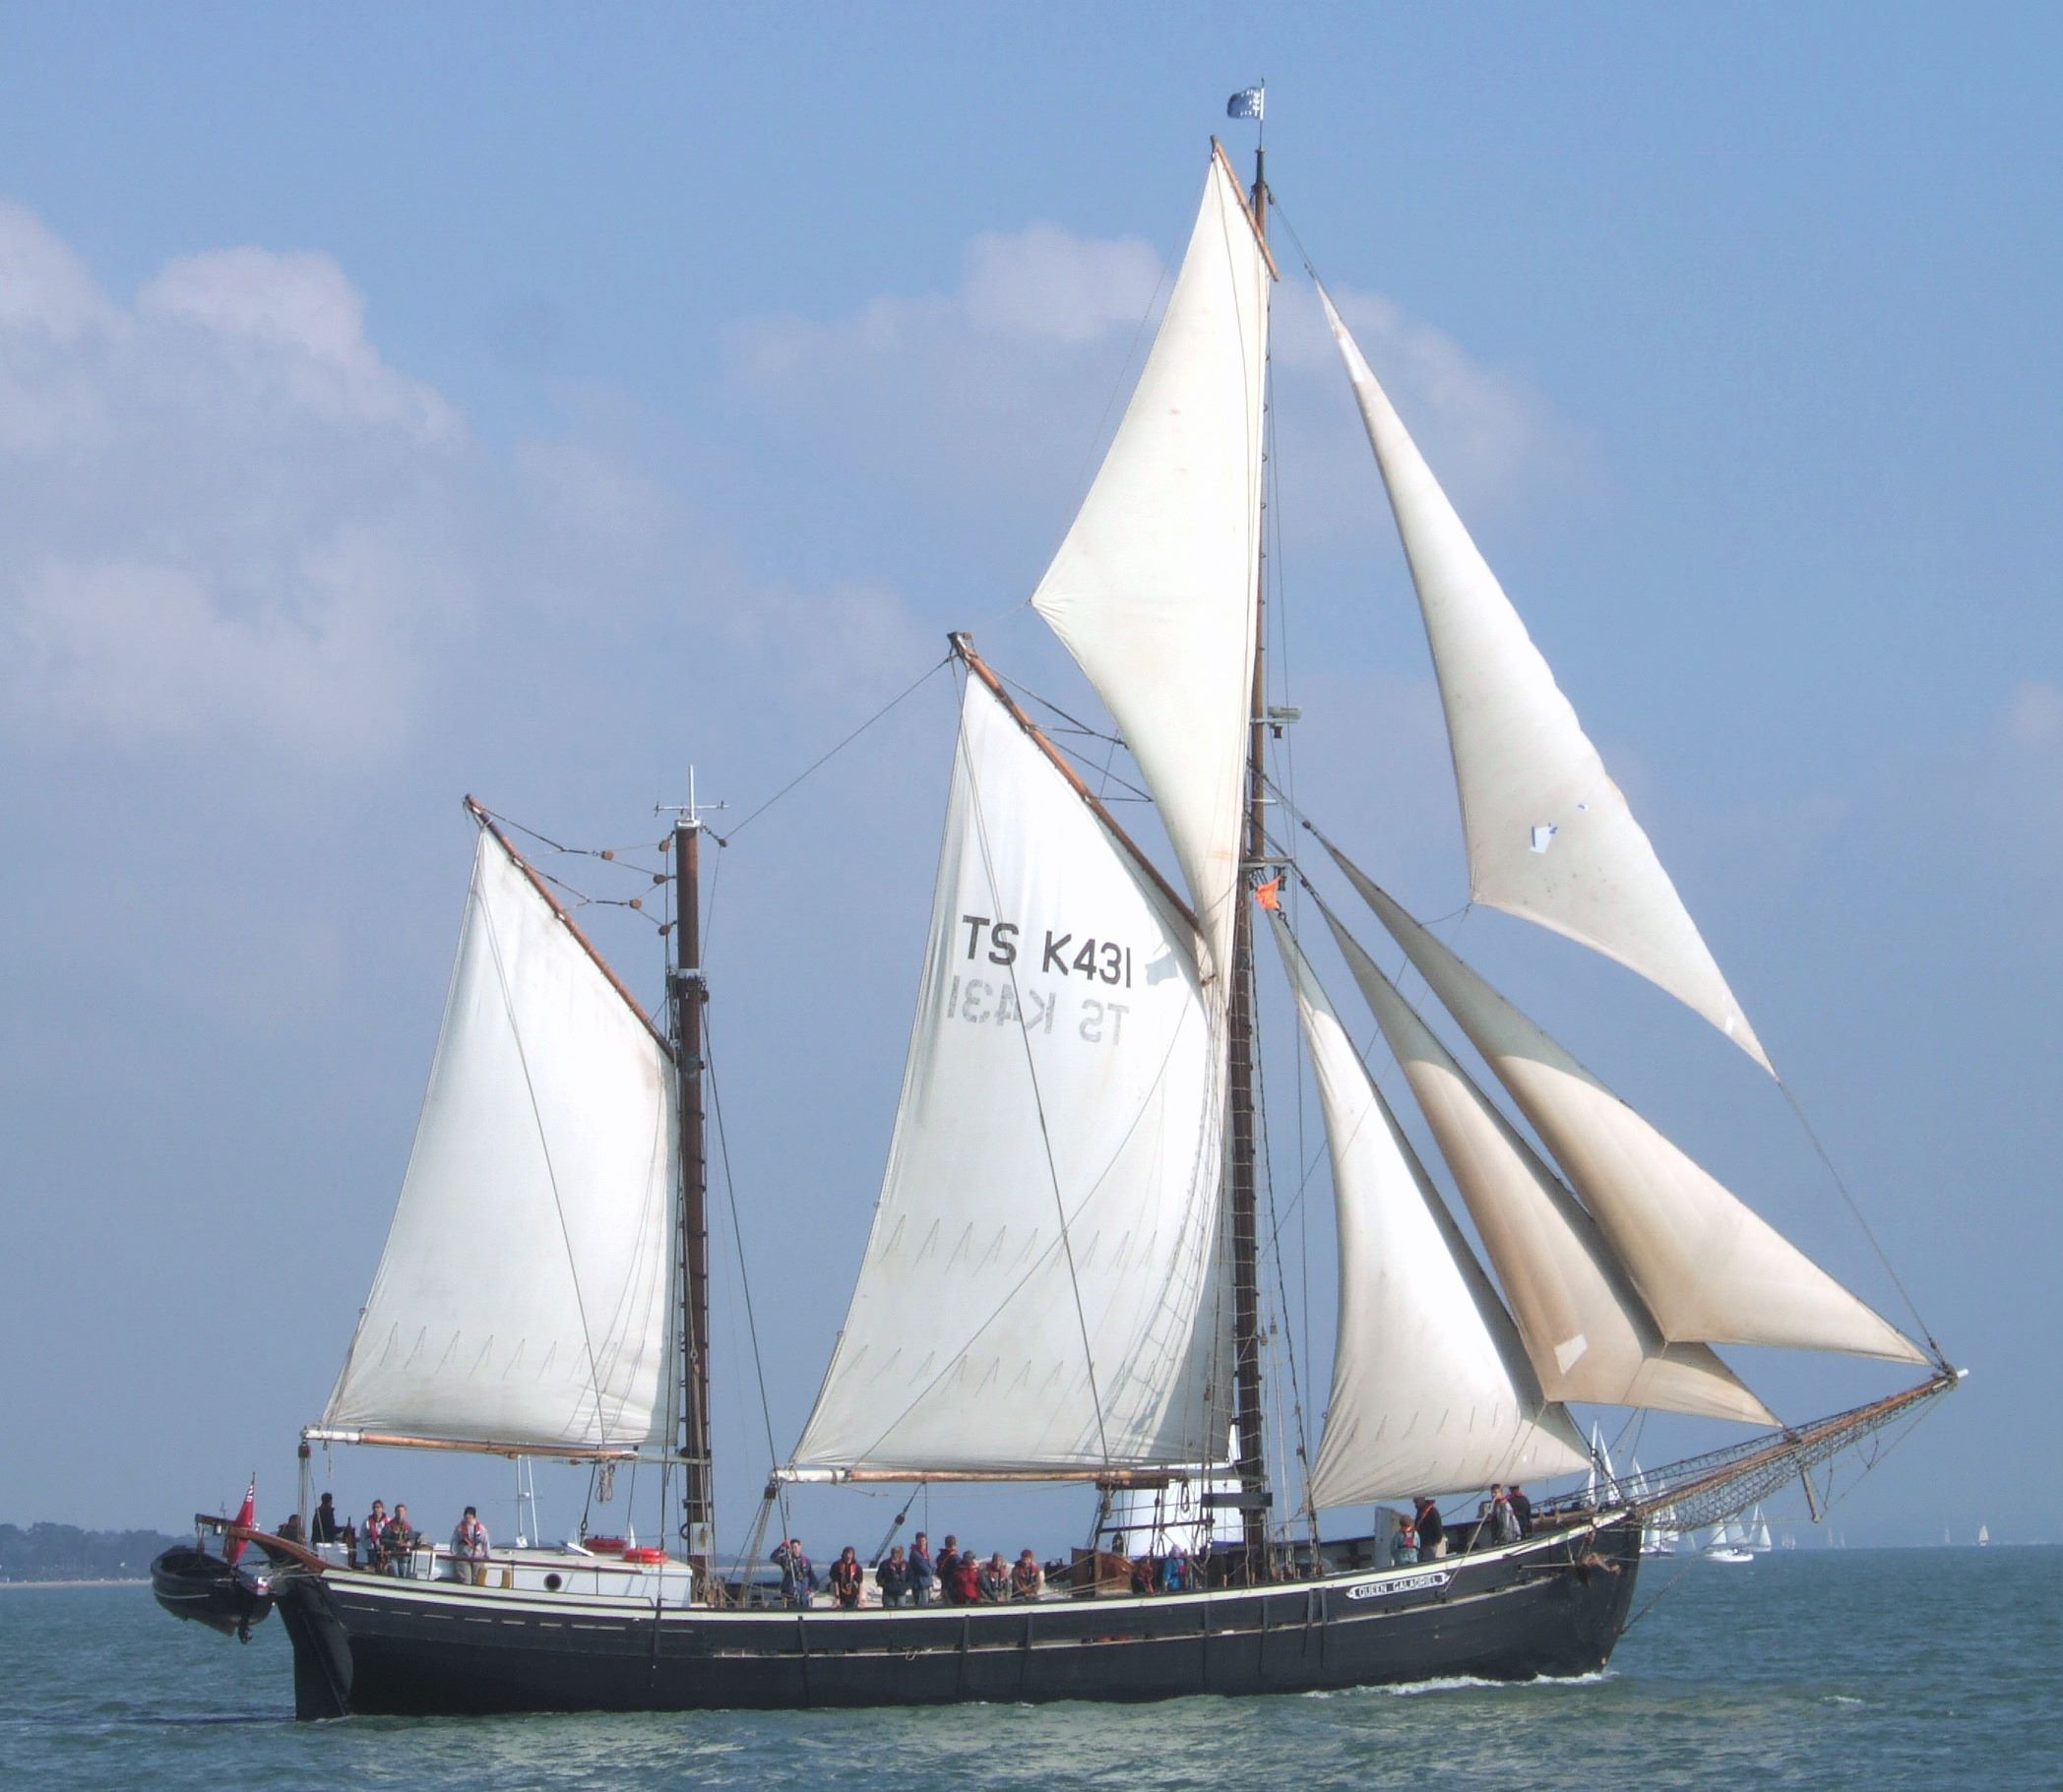 A large sailing boat in full sail.